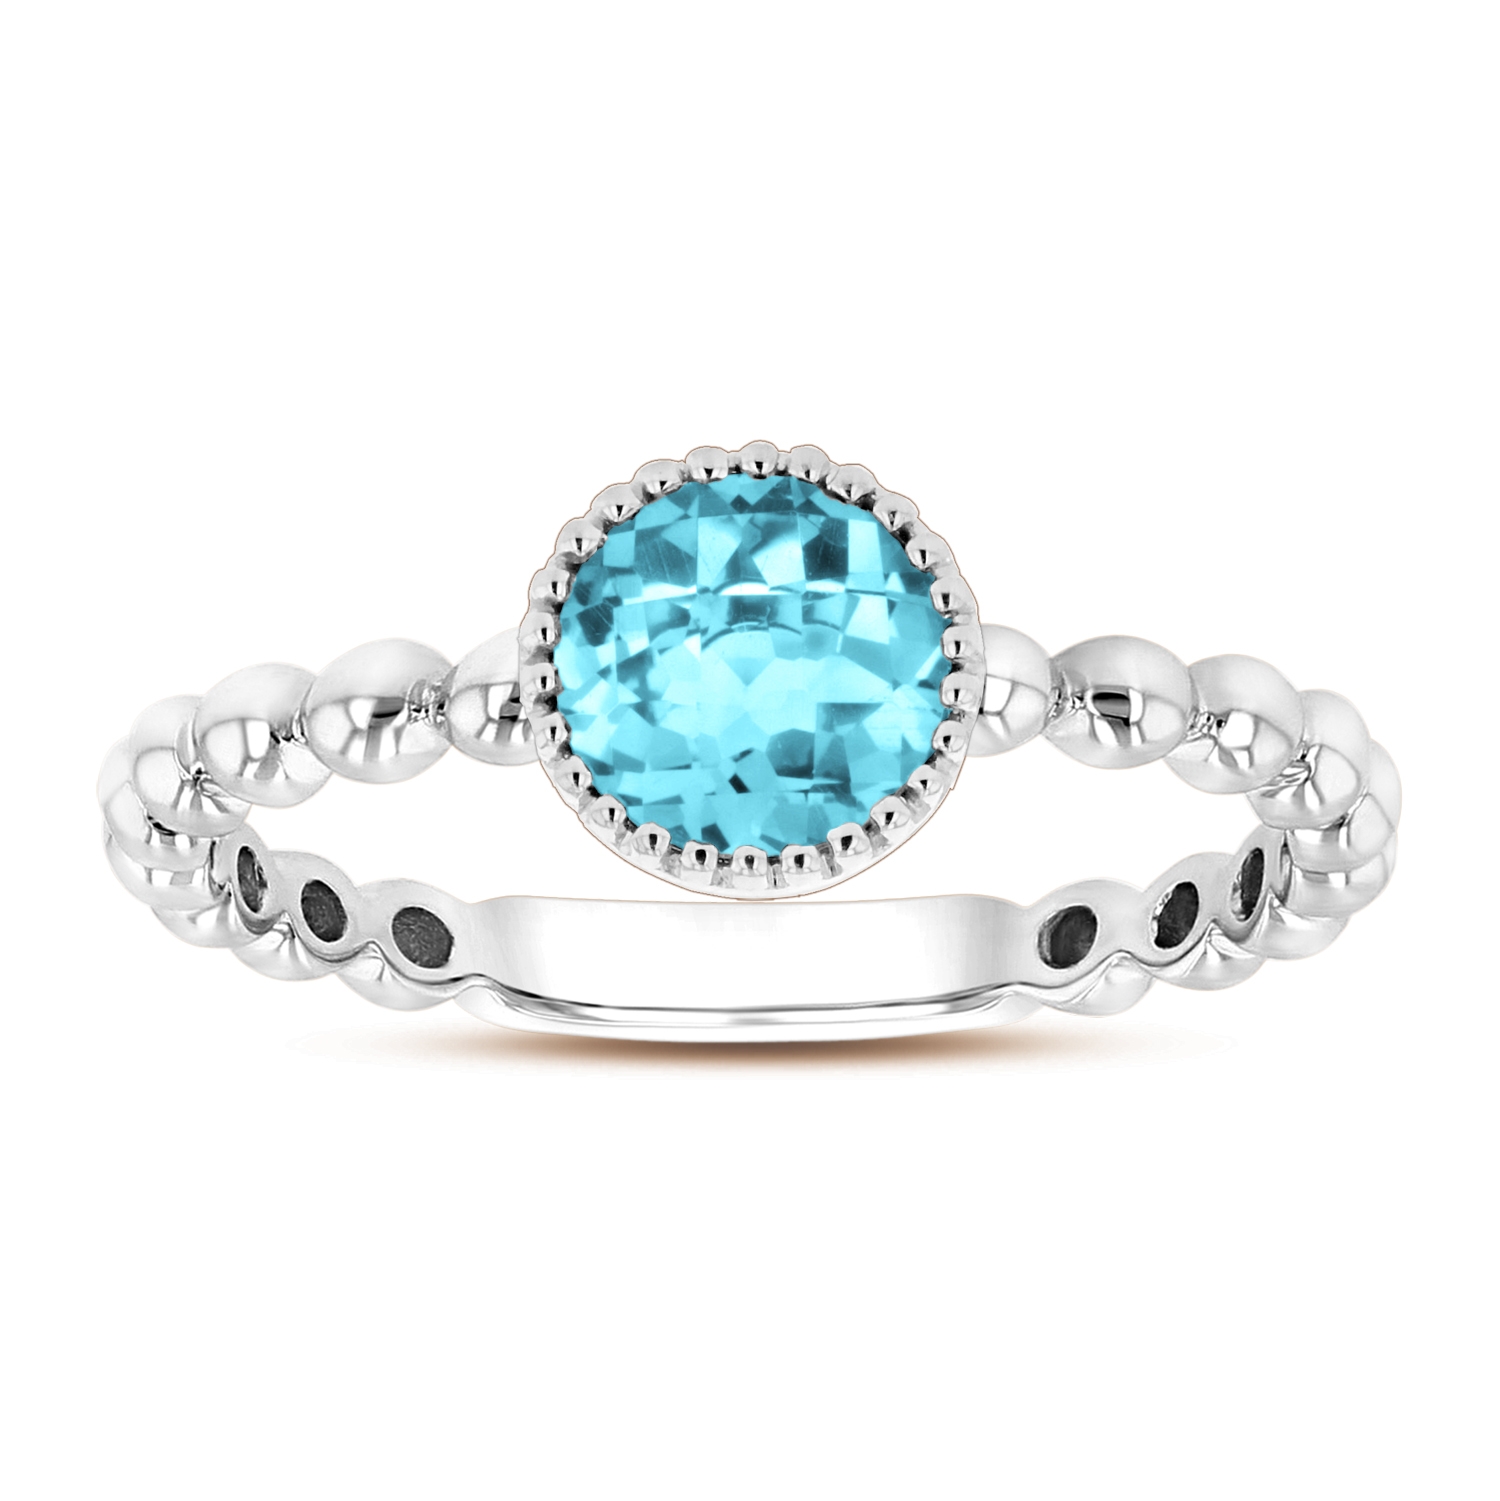 View 6mm Round Blue Topaz Ring in 14k Gold